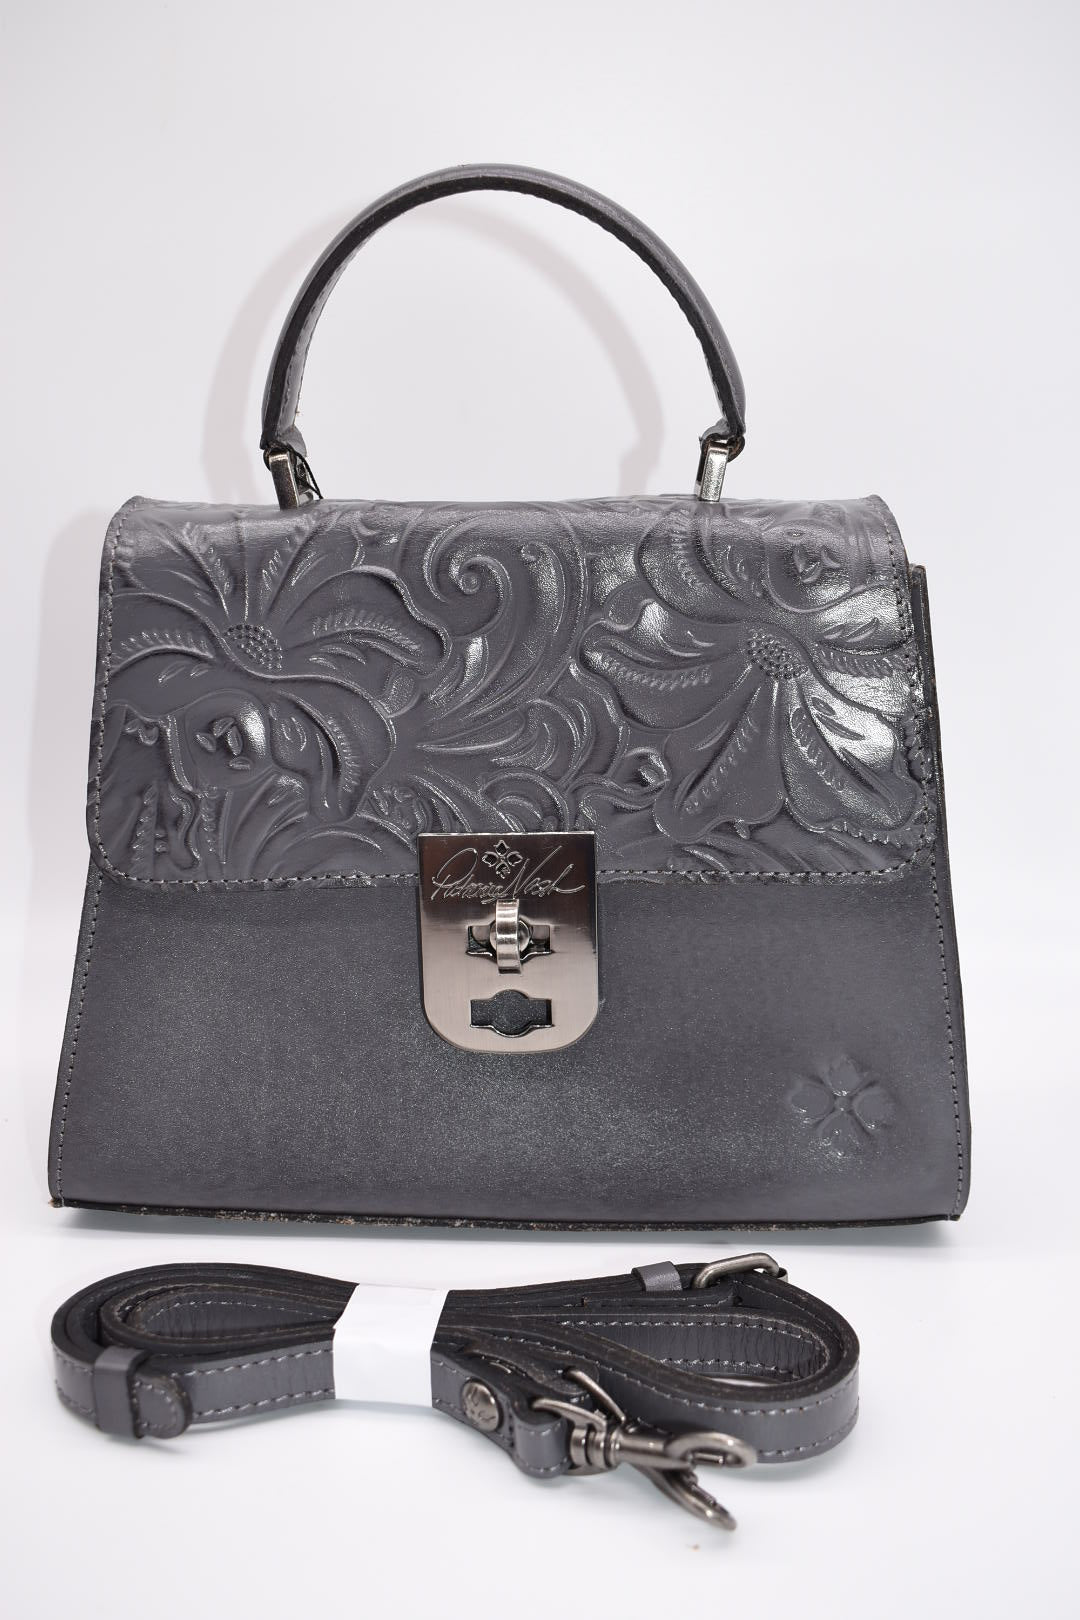 Patricia Nash Chauny Satchel Bag in Smoke Tooled Leather